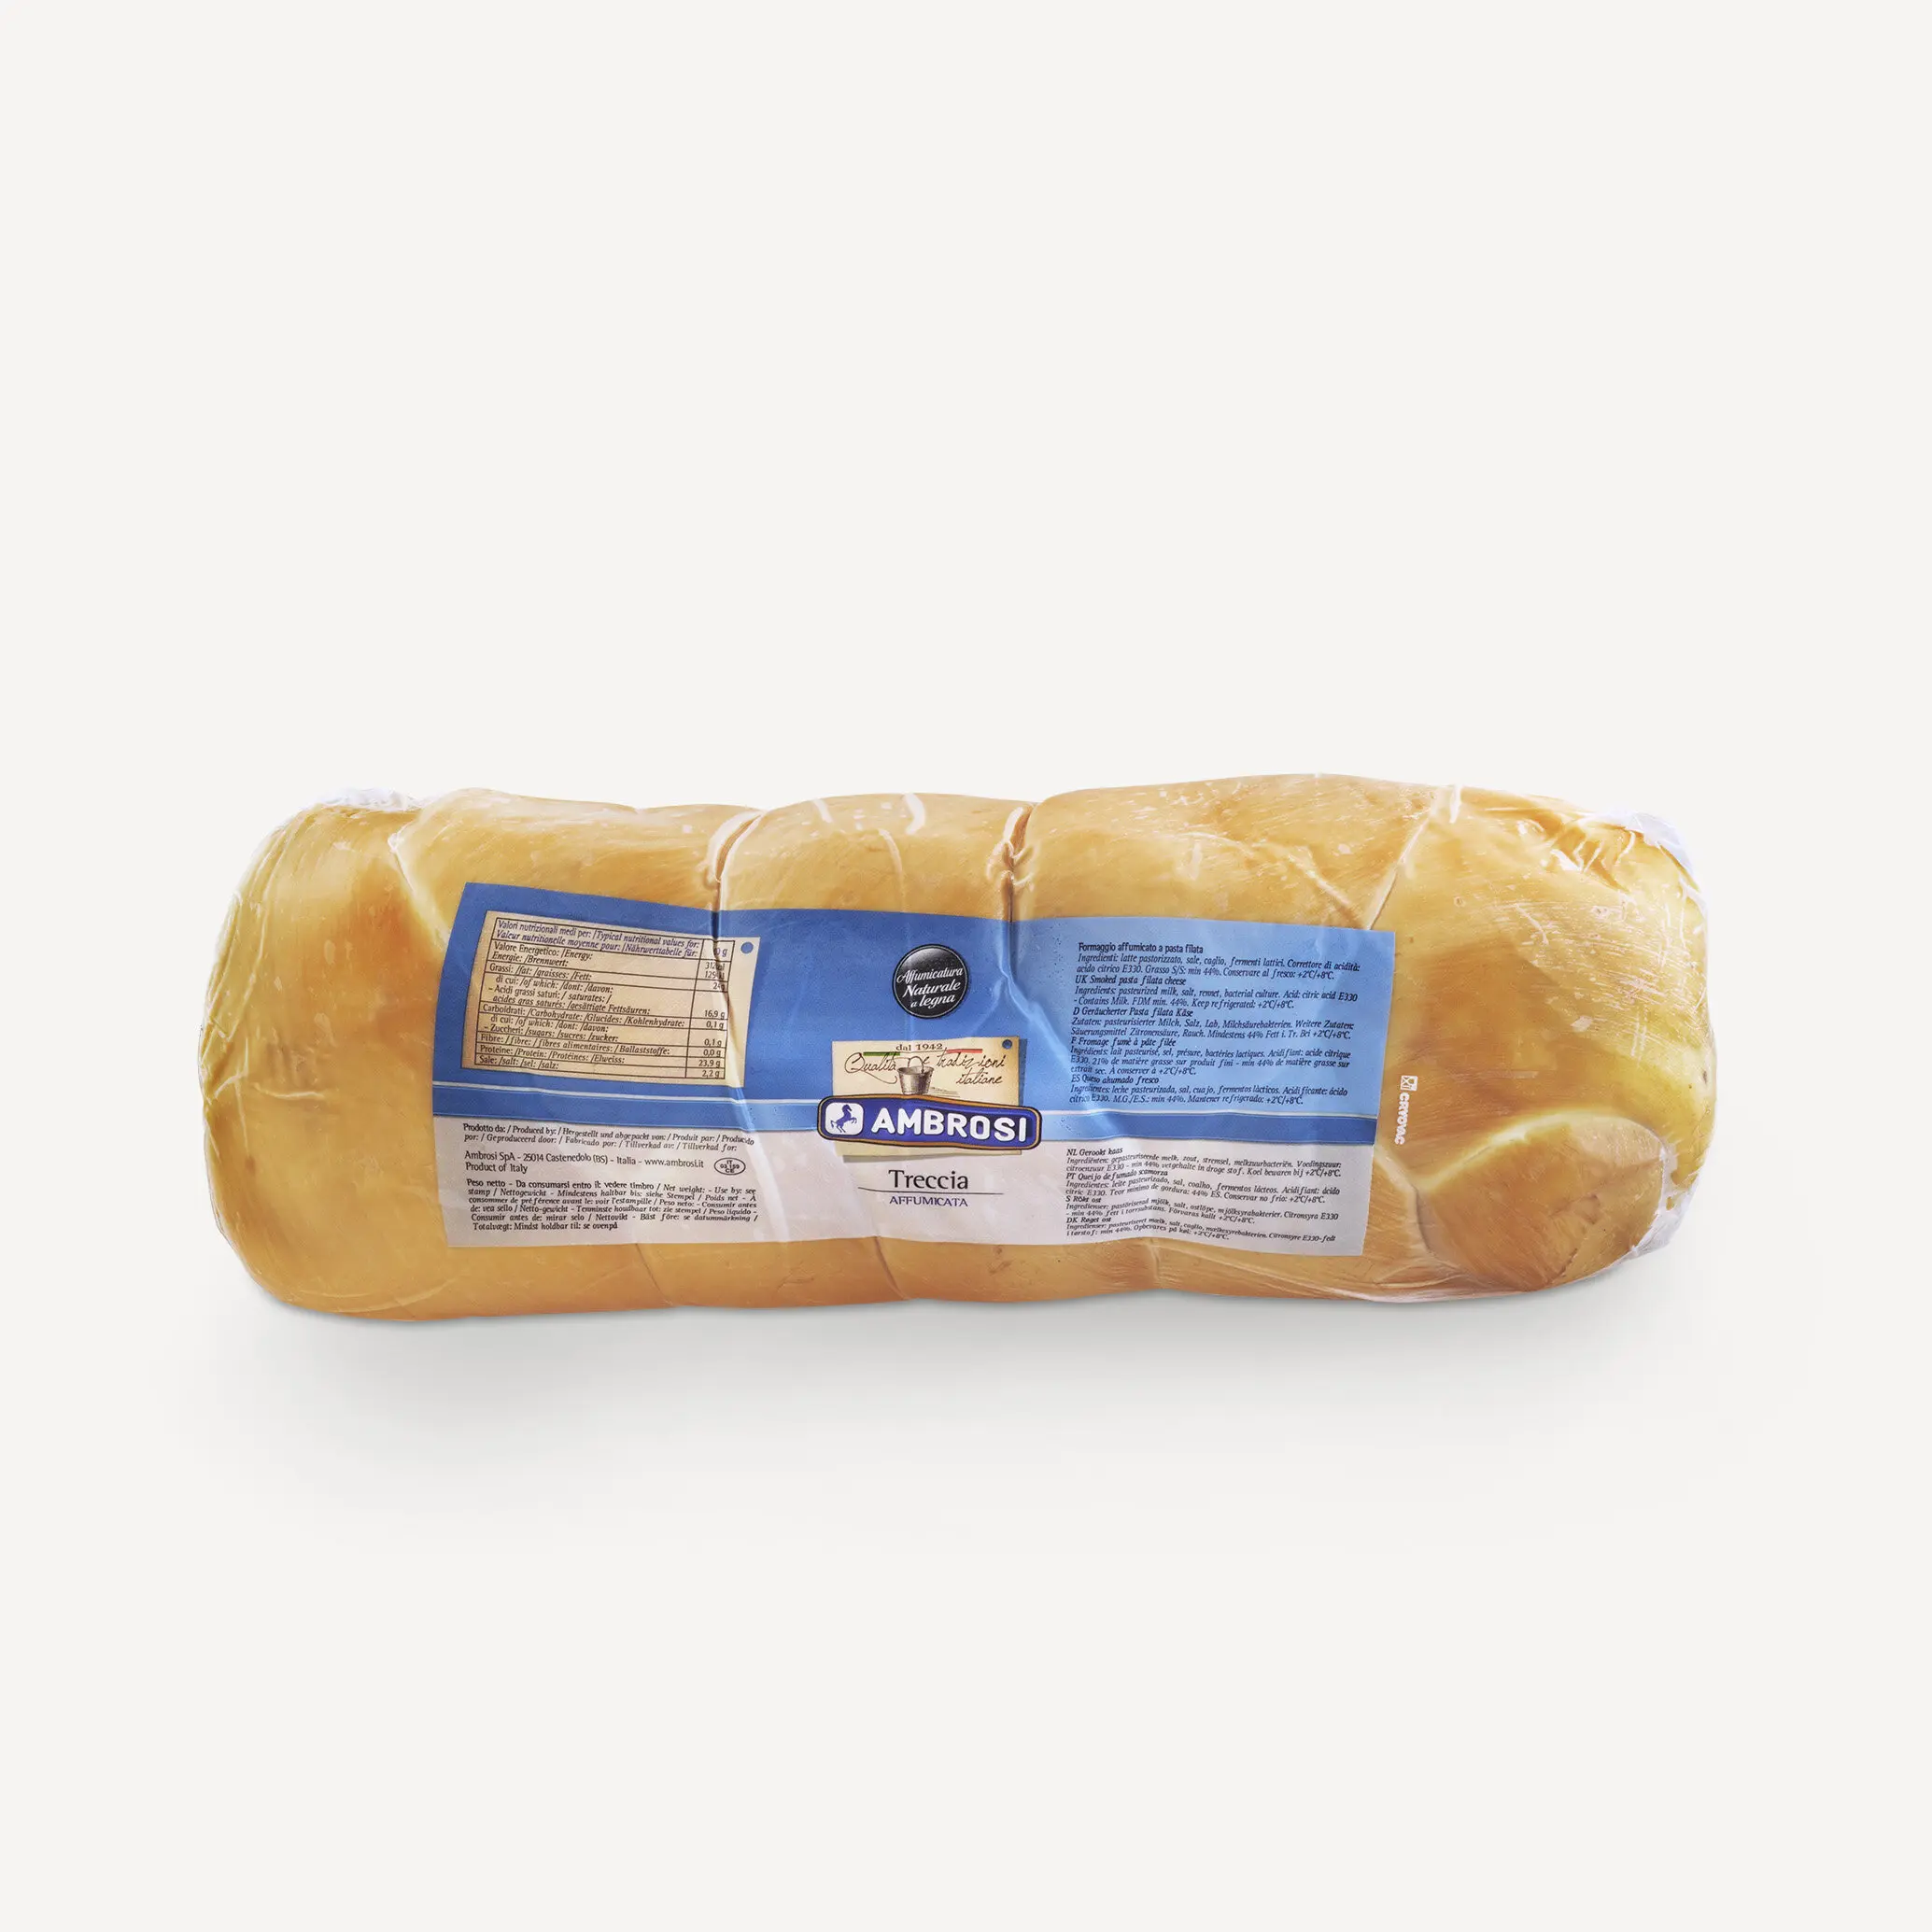 smoked provola cheese pregnancy - Can you eat provolone cheese while pregnant